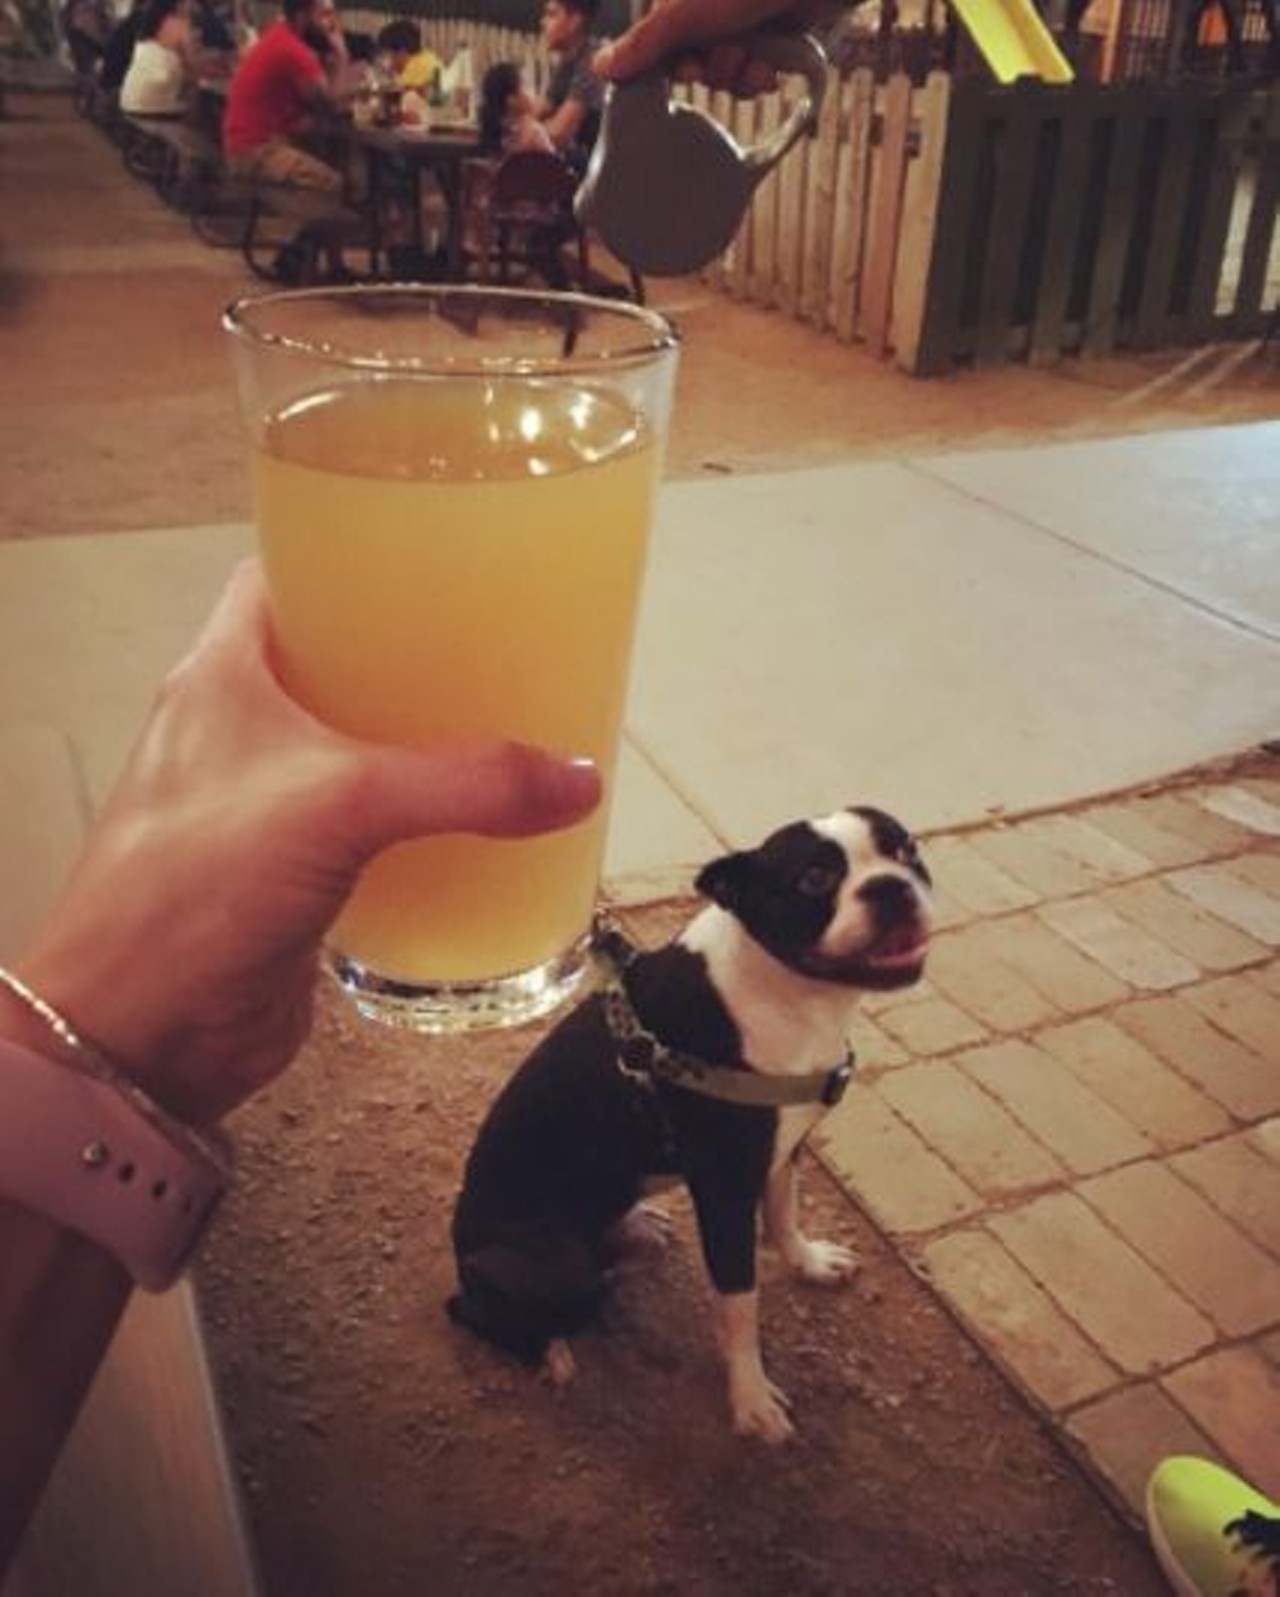 The Cove  
606 W. Cypress St., (210) 227-2683
You won&#146;t have to feel guilty for leaving your pet behind at this restaurant and bar. The cove is 100% animal friendly &#151; they even have a dog park. 
Photo via Instagram, moi.diane